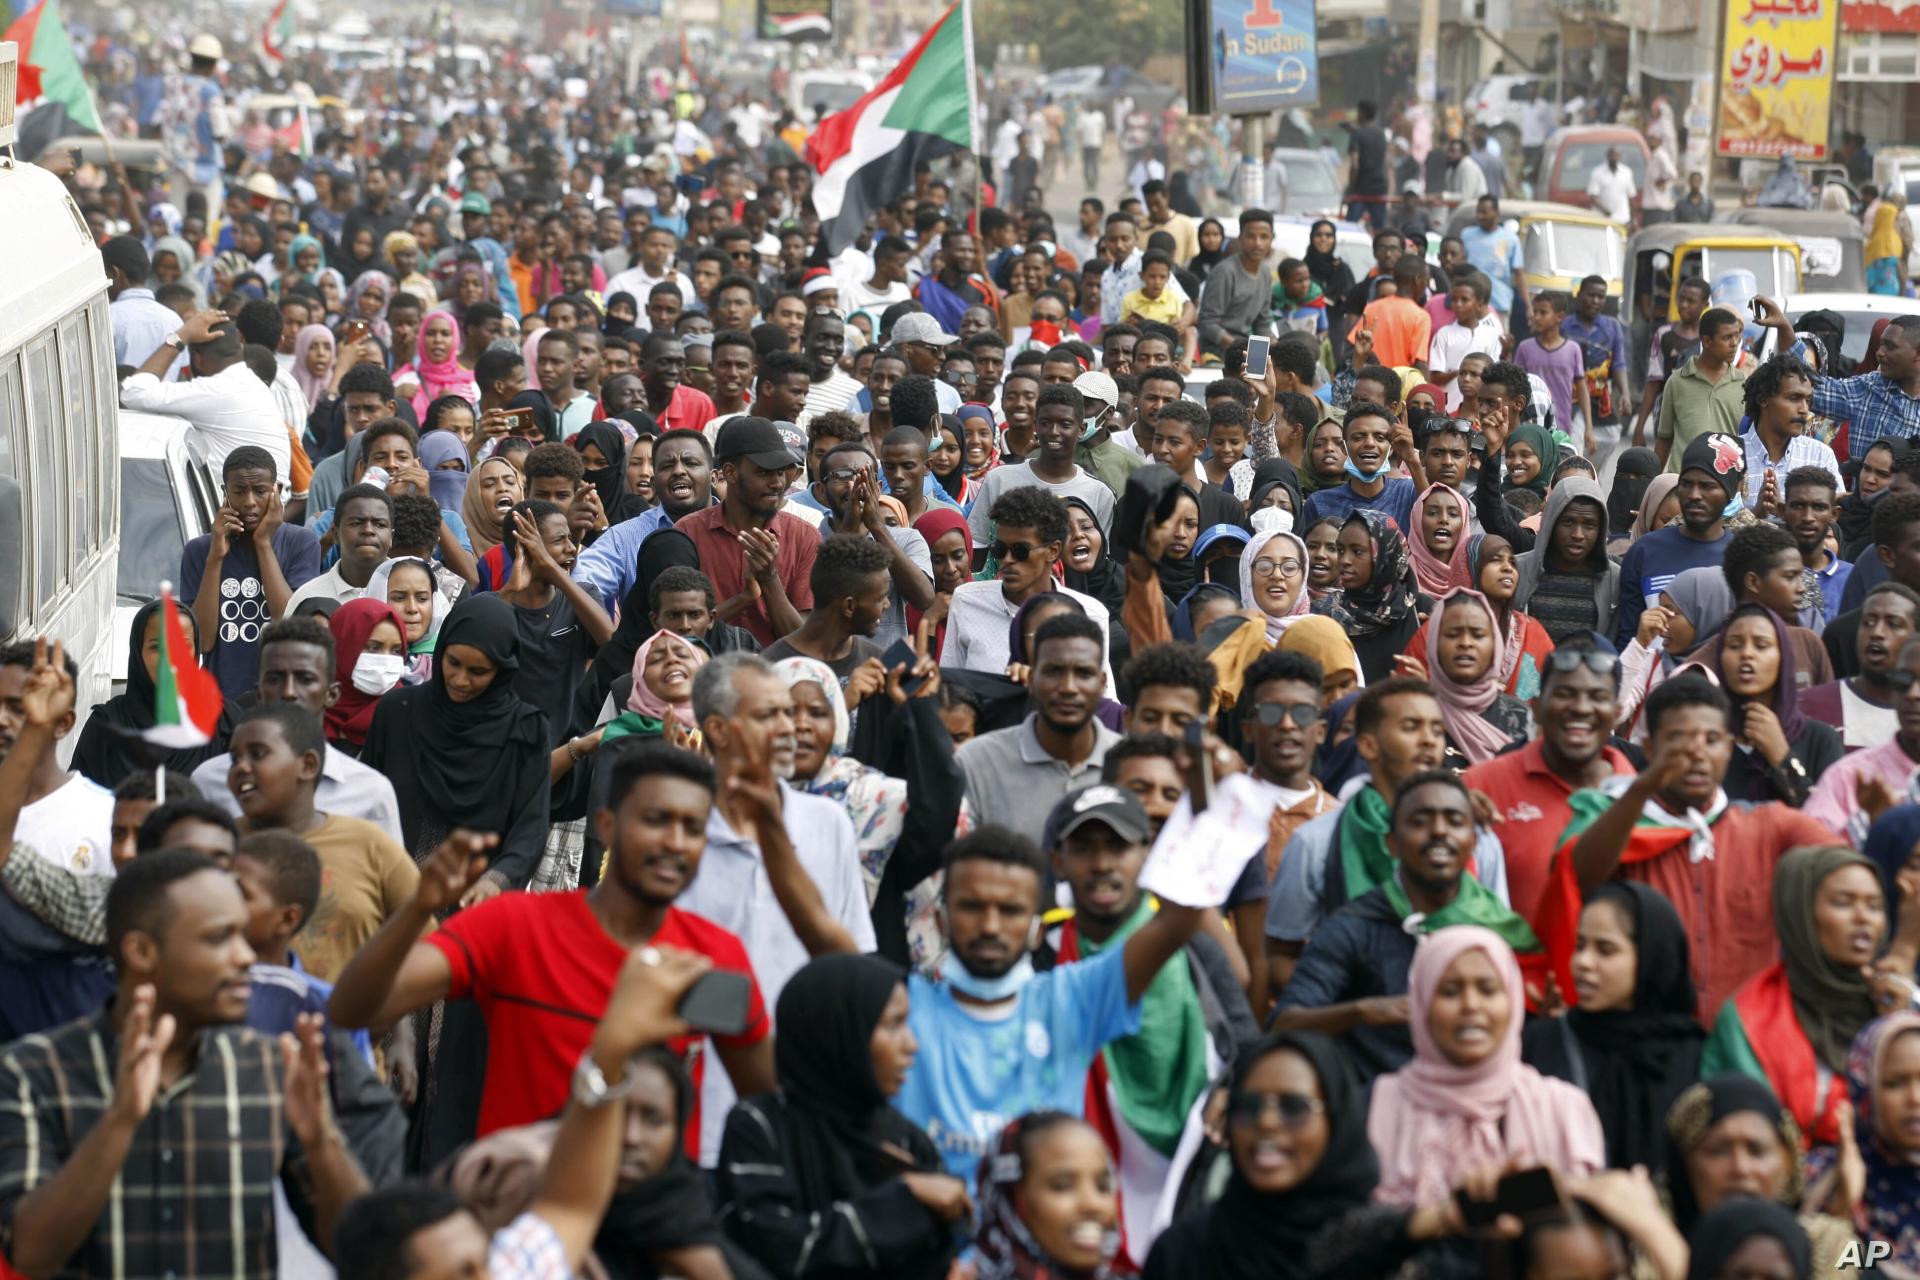 Sudan protest calls for military coup as political crisis deepens